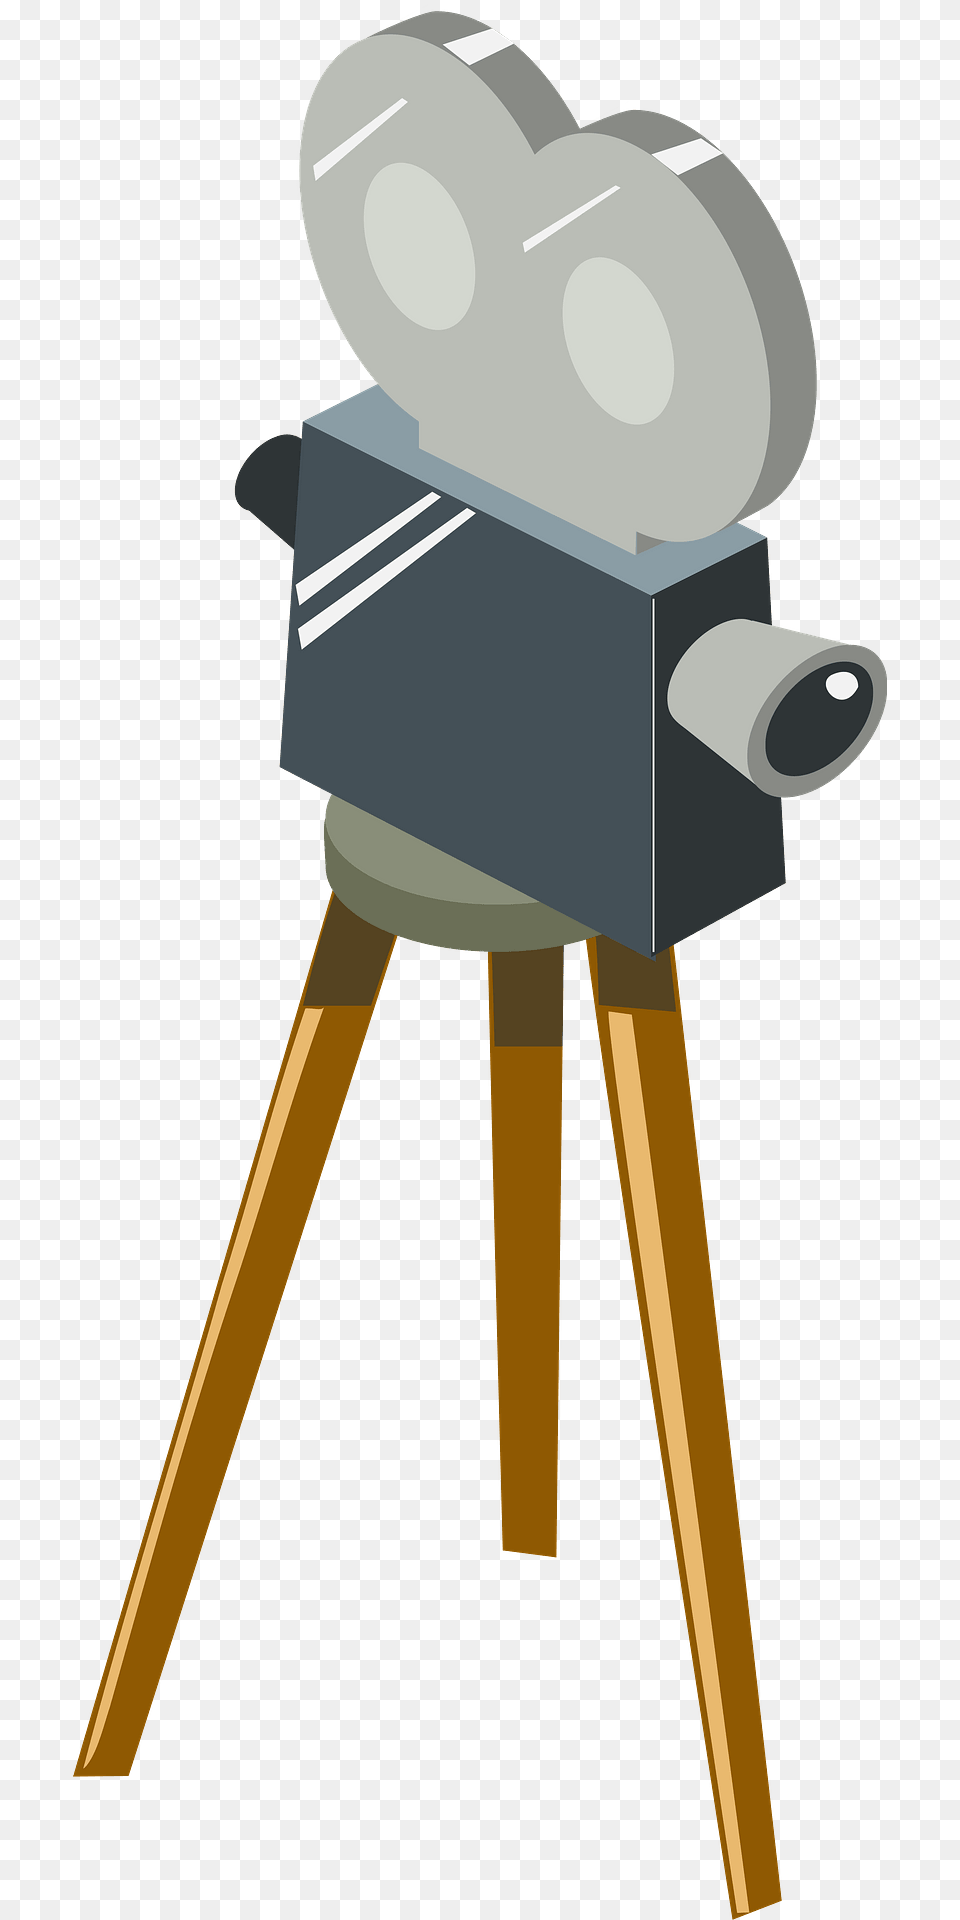 Reel To Reel Movie Projector On A Tripod Clipart Png